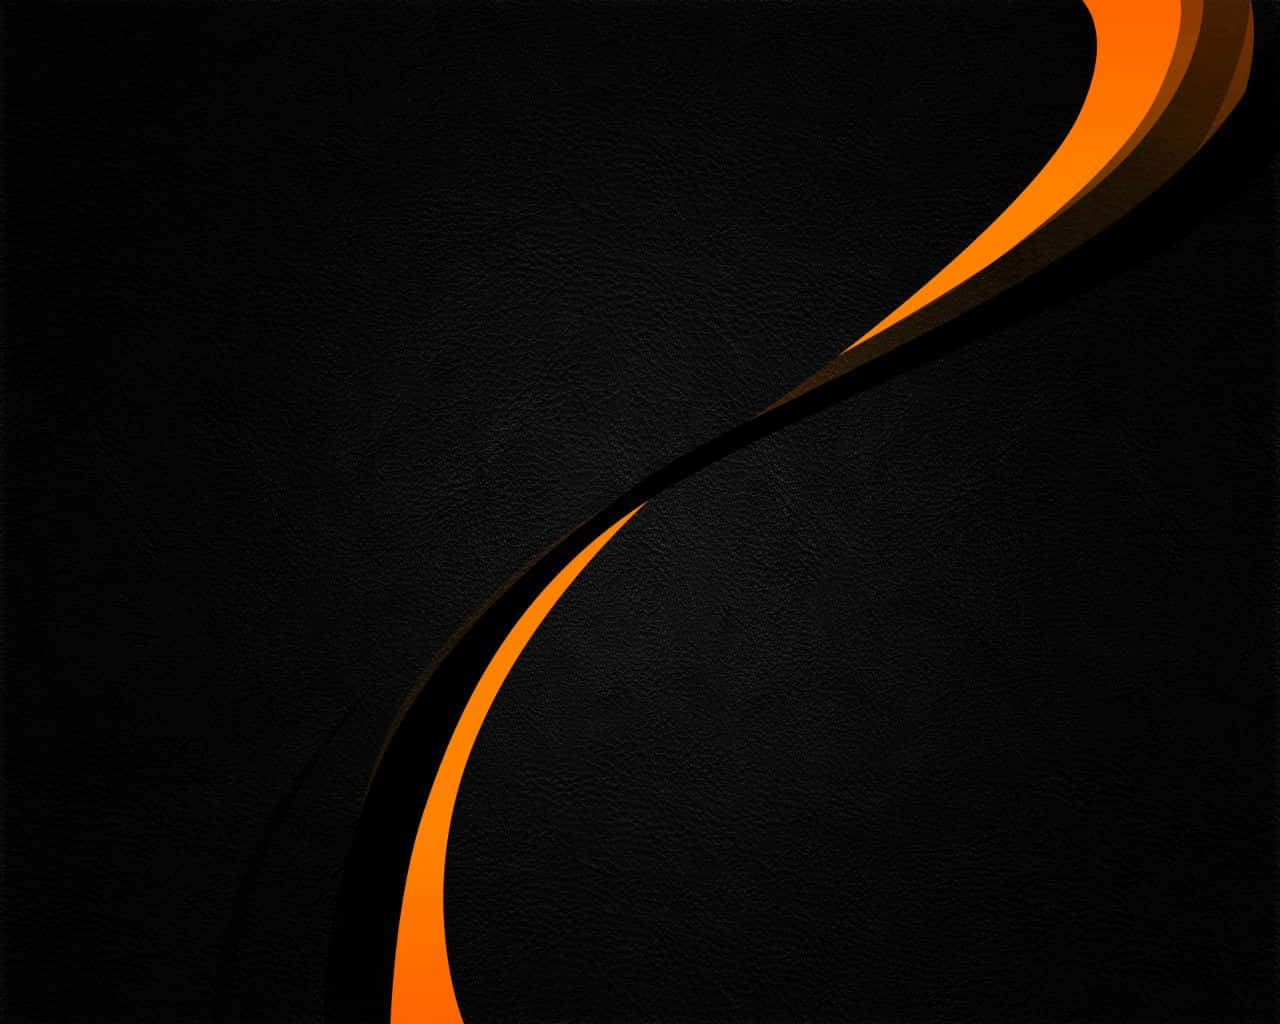 An Orange And Black Background With A Curved Line